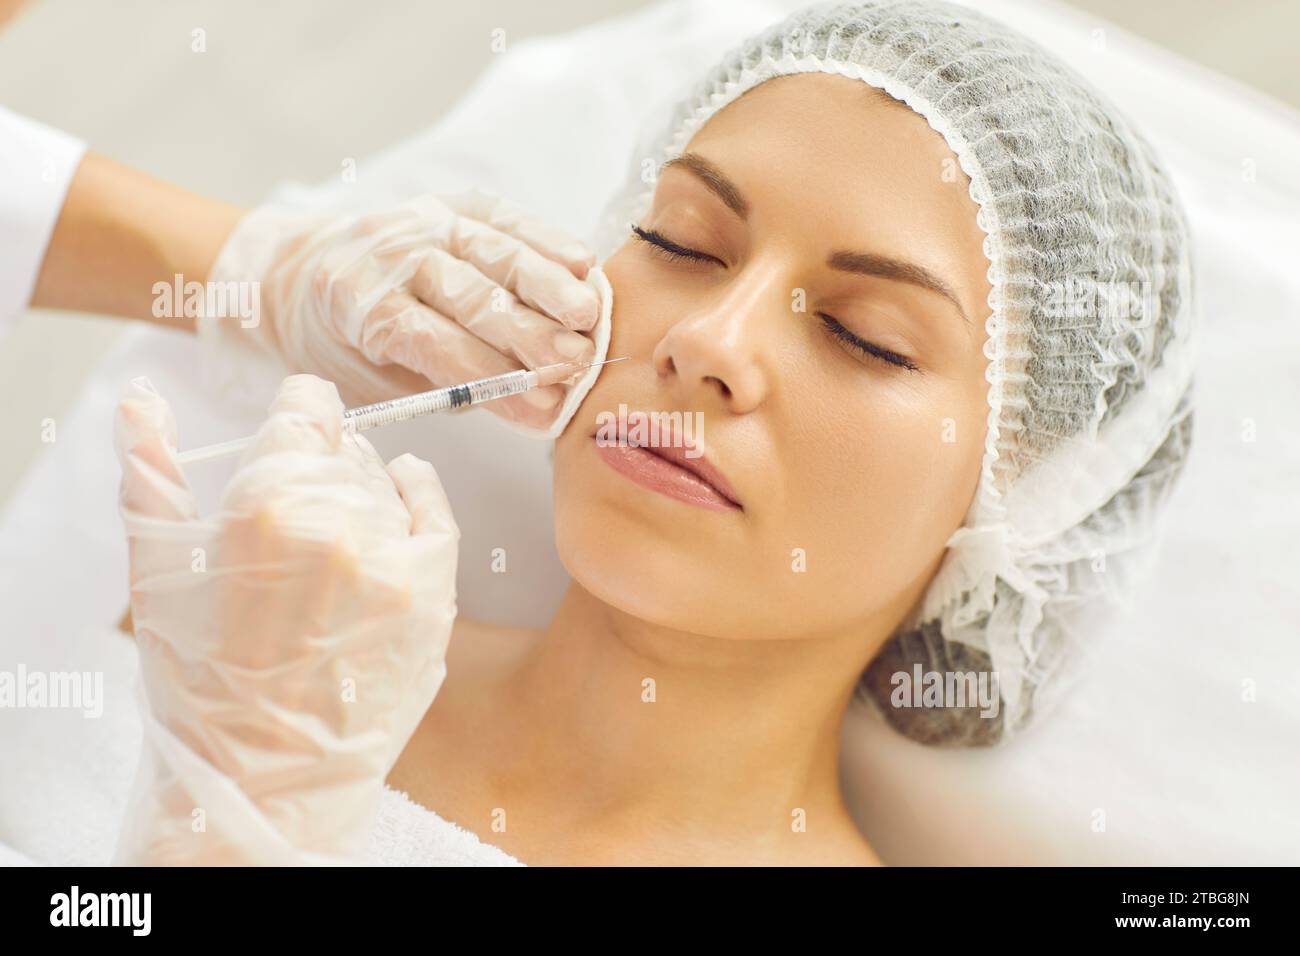 Woman receives nasolabial fold injection given by aesthetic medicine professional Stock Photo